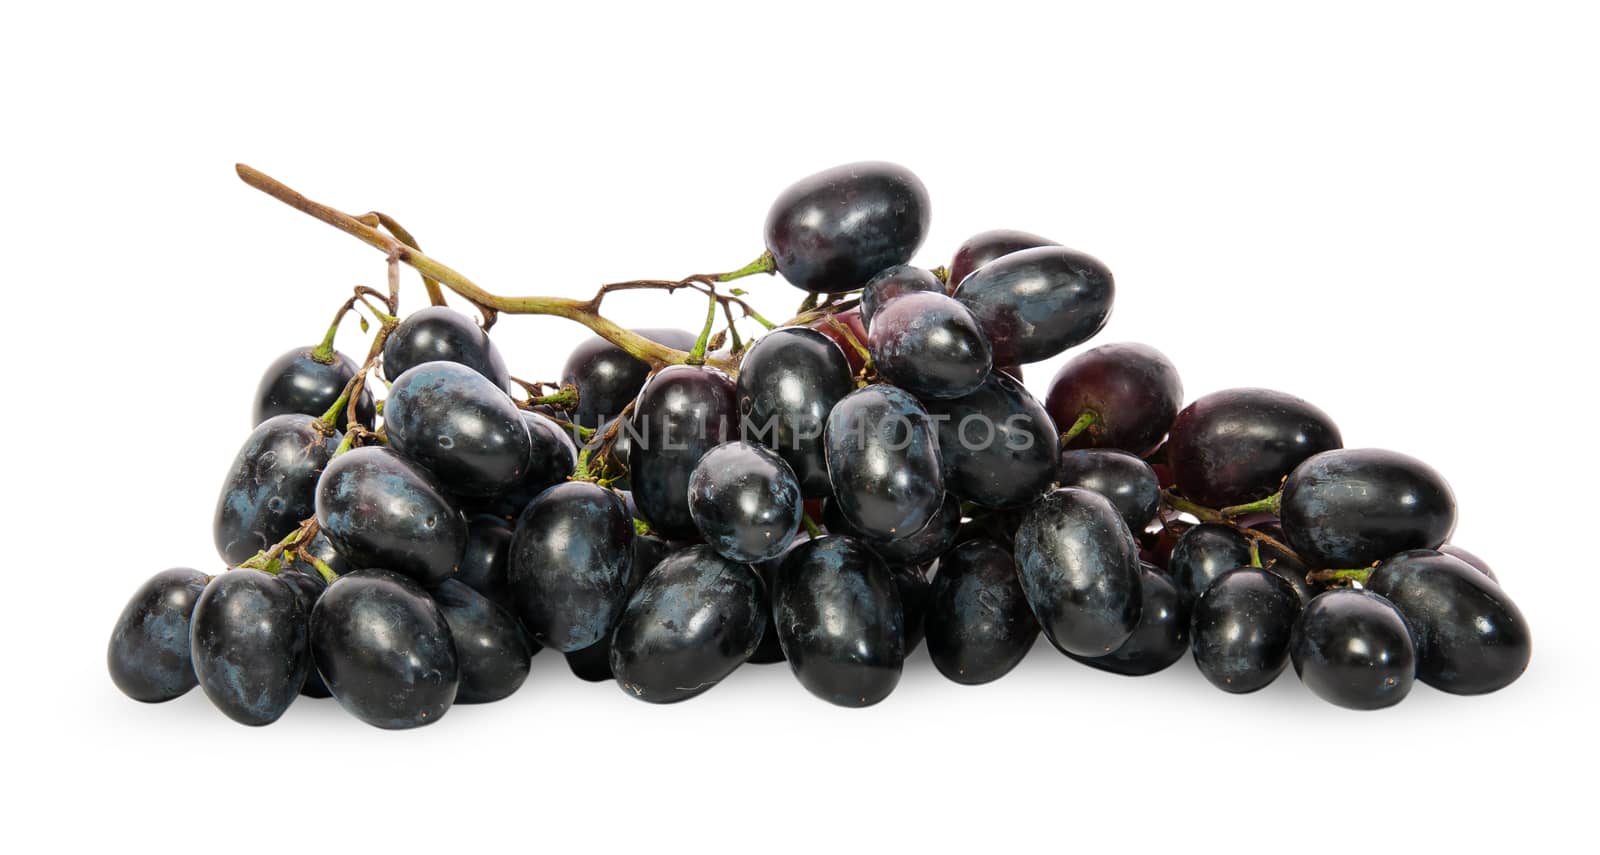 Bunch of ripe dark grapes isolated on white background